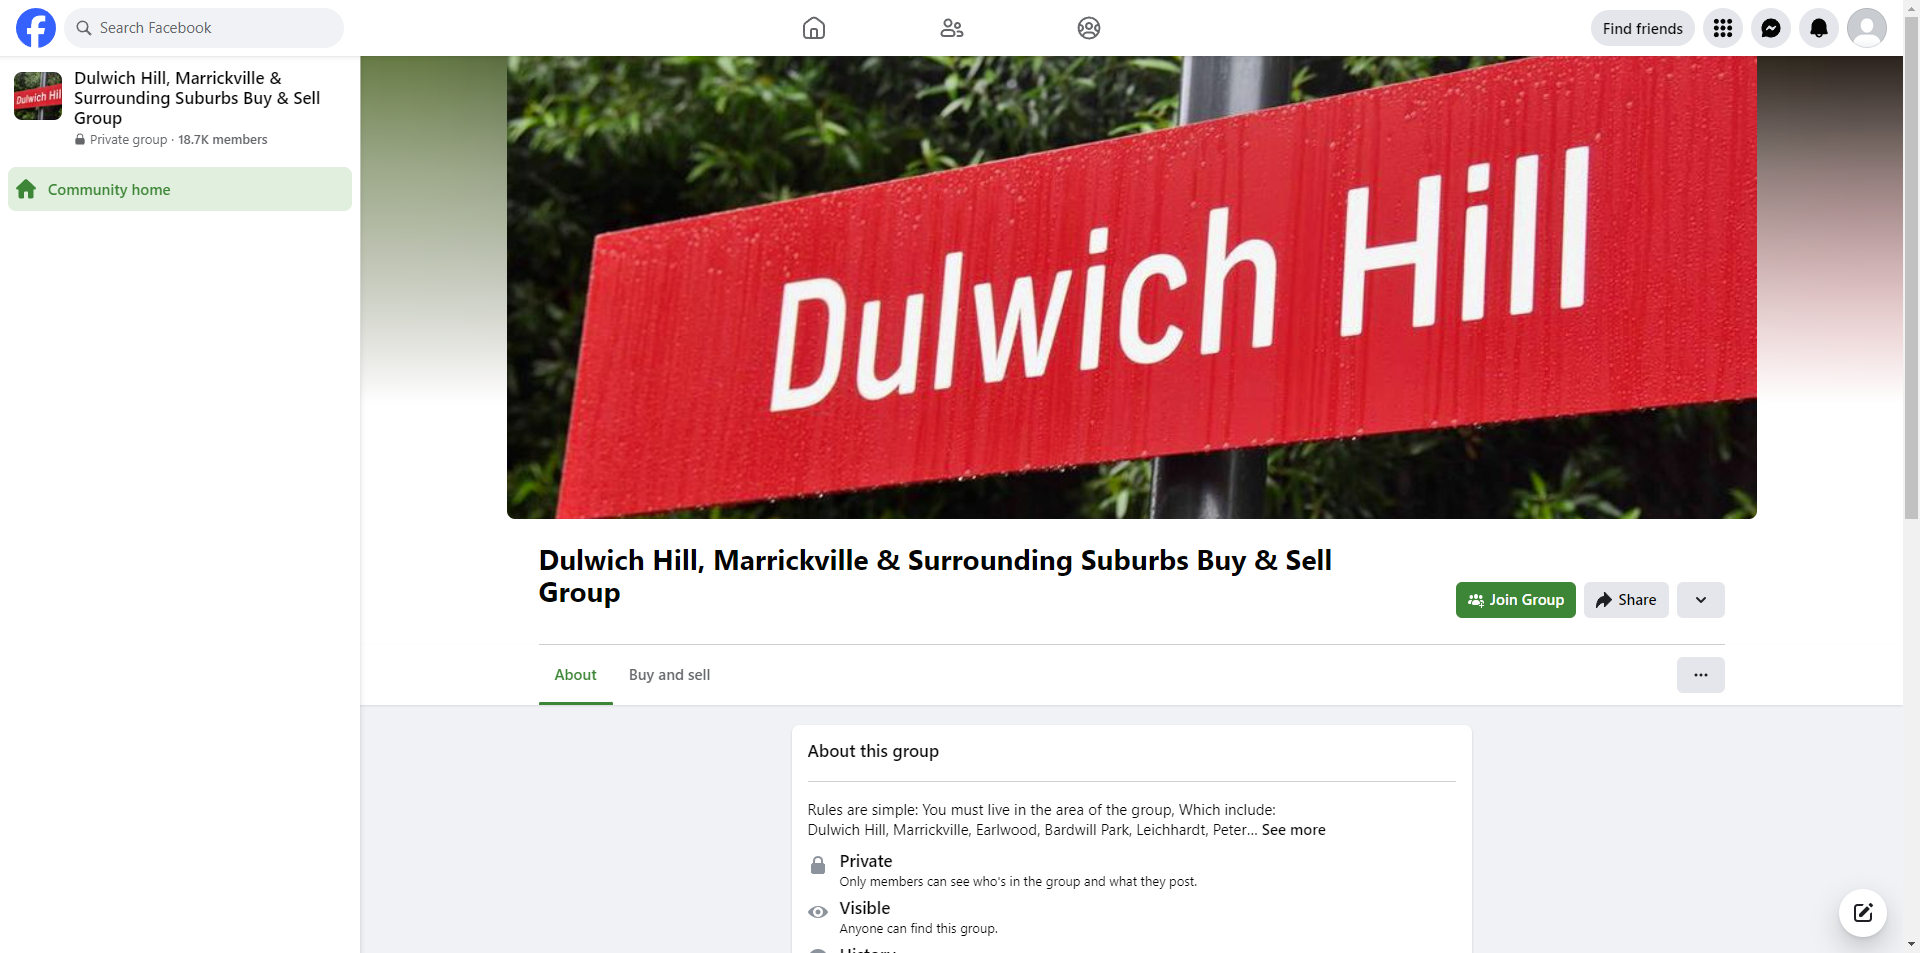 Dulwich Hill, Marrickville & Surrounding Suburbs Buy & Sell Group